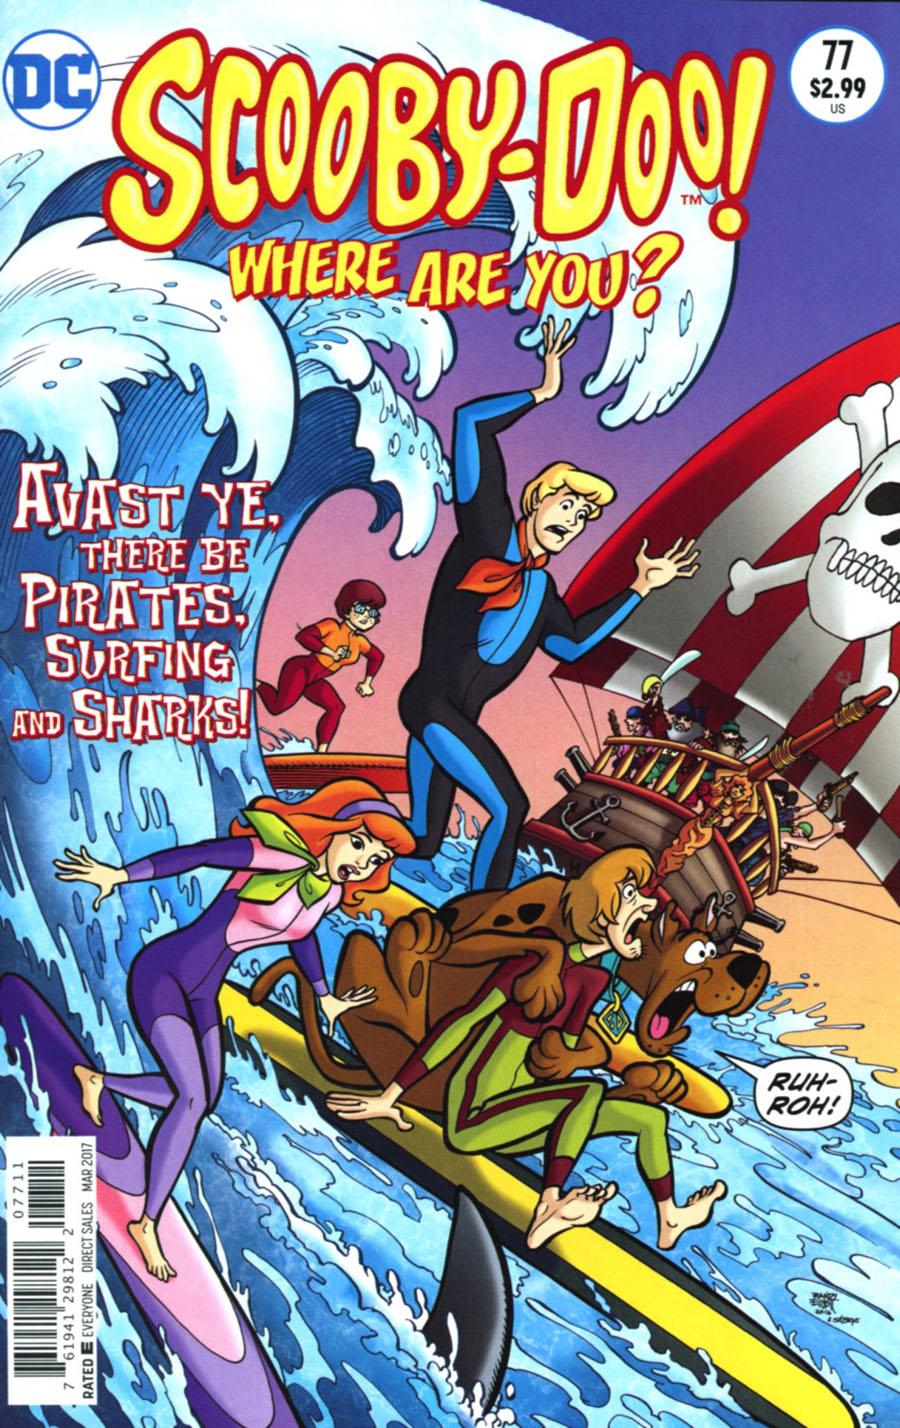 Scooby-Doo Where Are You Vol. 1 #77